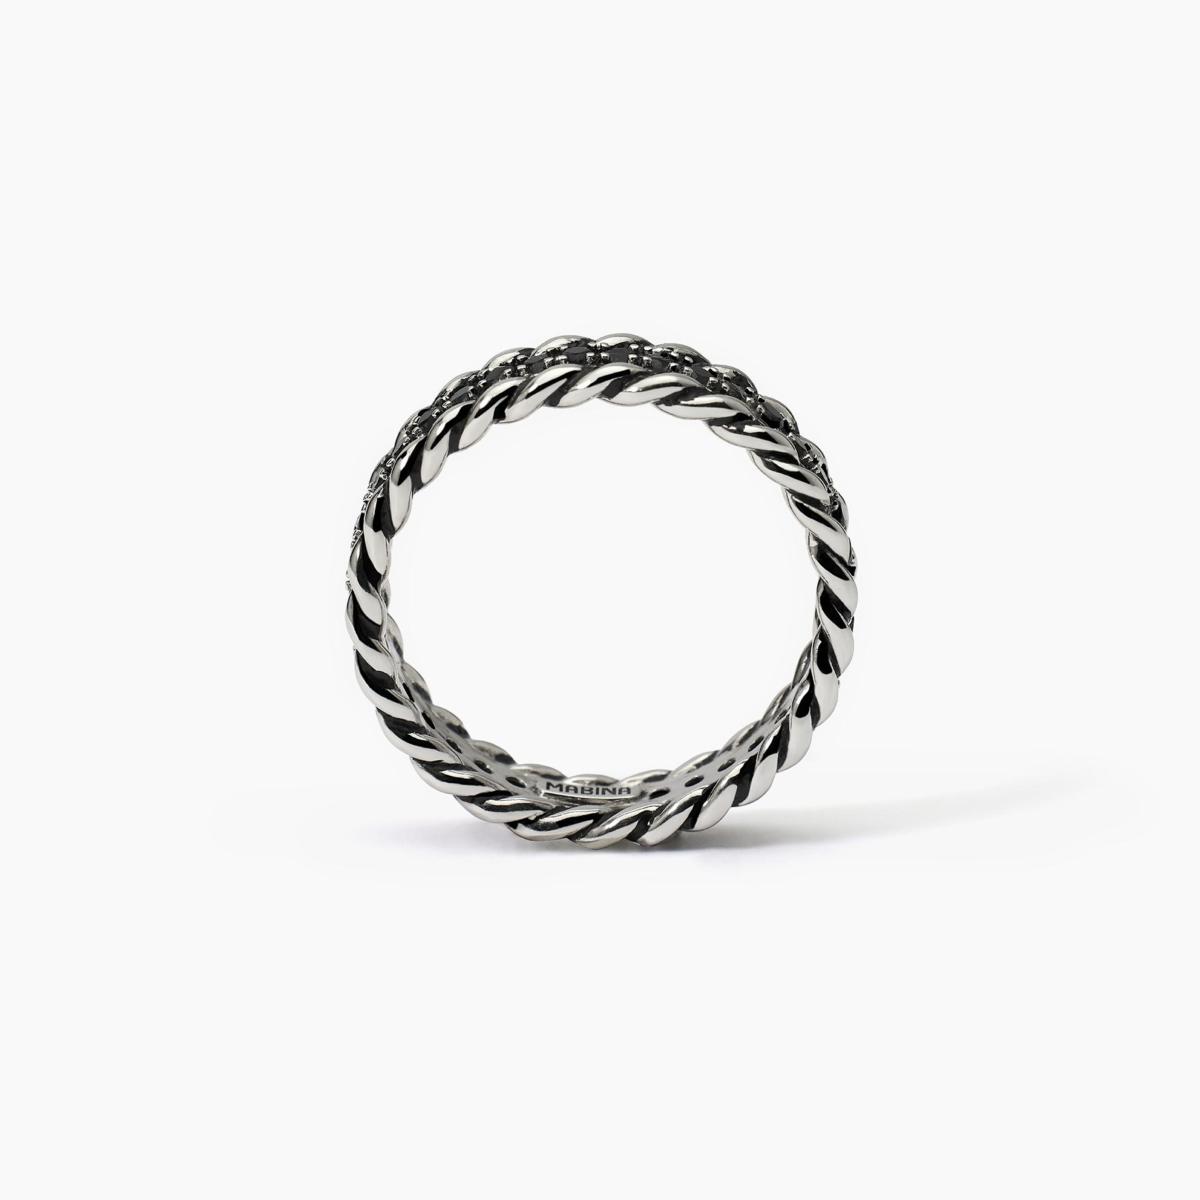 MABINA 925mm SILVER RING FOR MEN 523332 SIZE 21